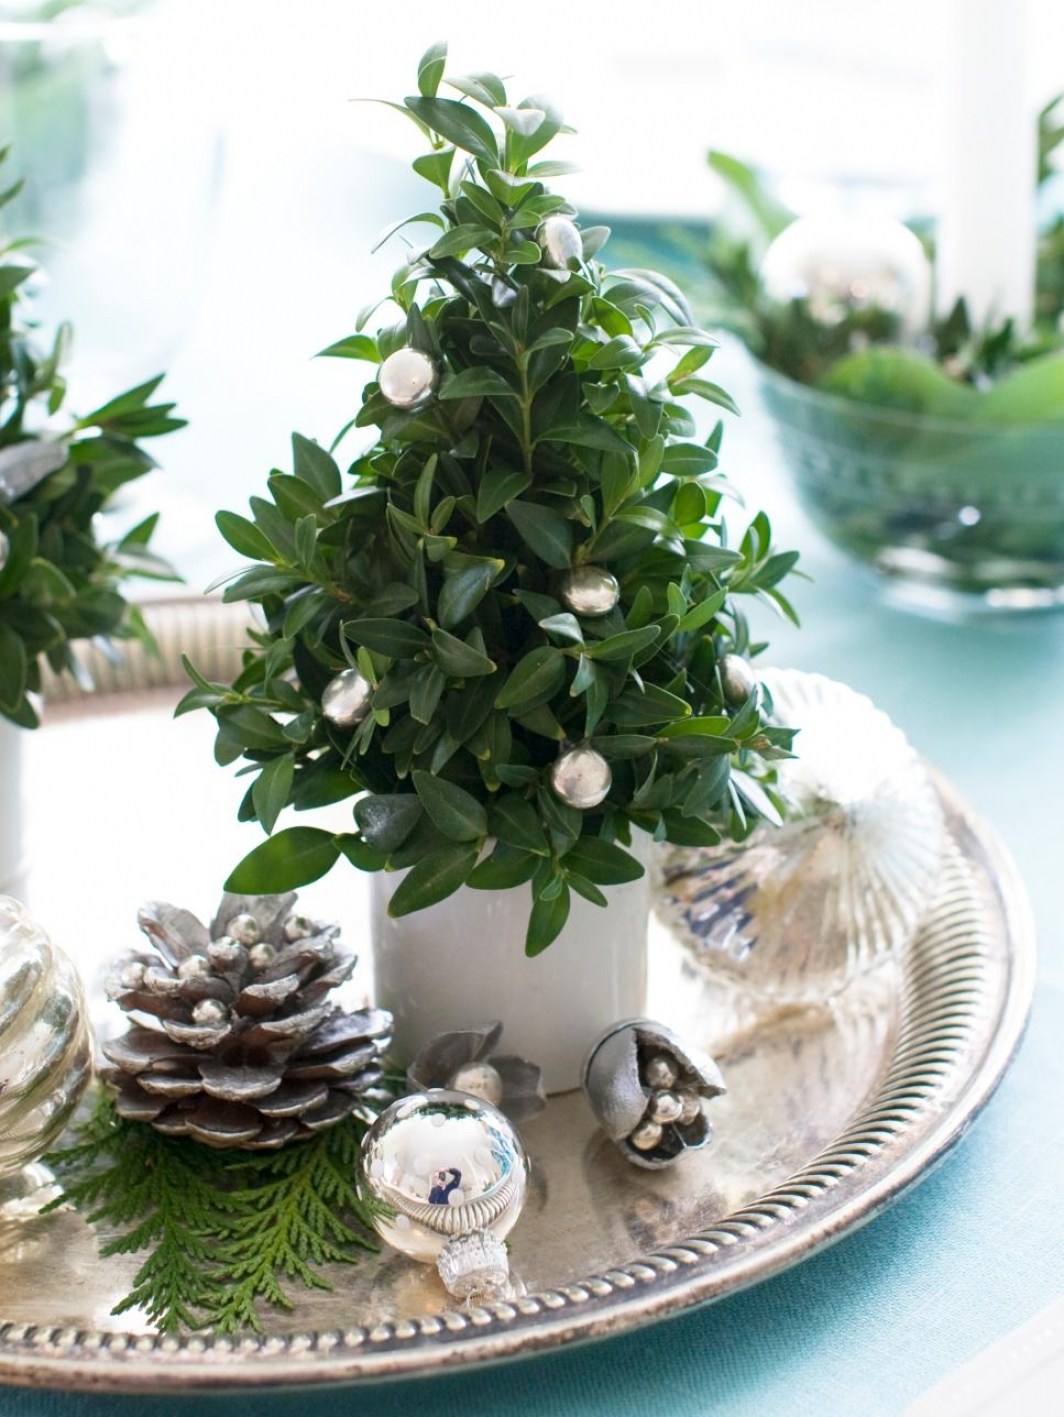 12 Chic, Easy Holiday Table Ideas | Hgtv with regard to Christmas Floral Table Decorations